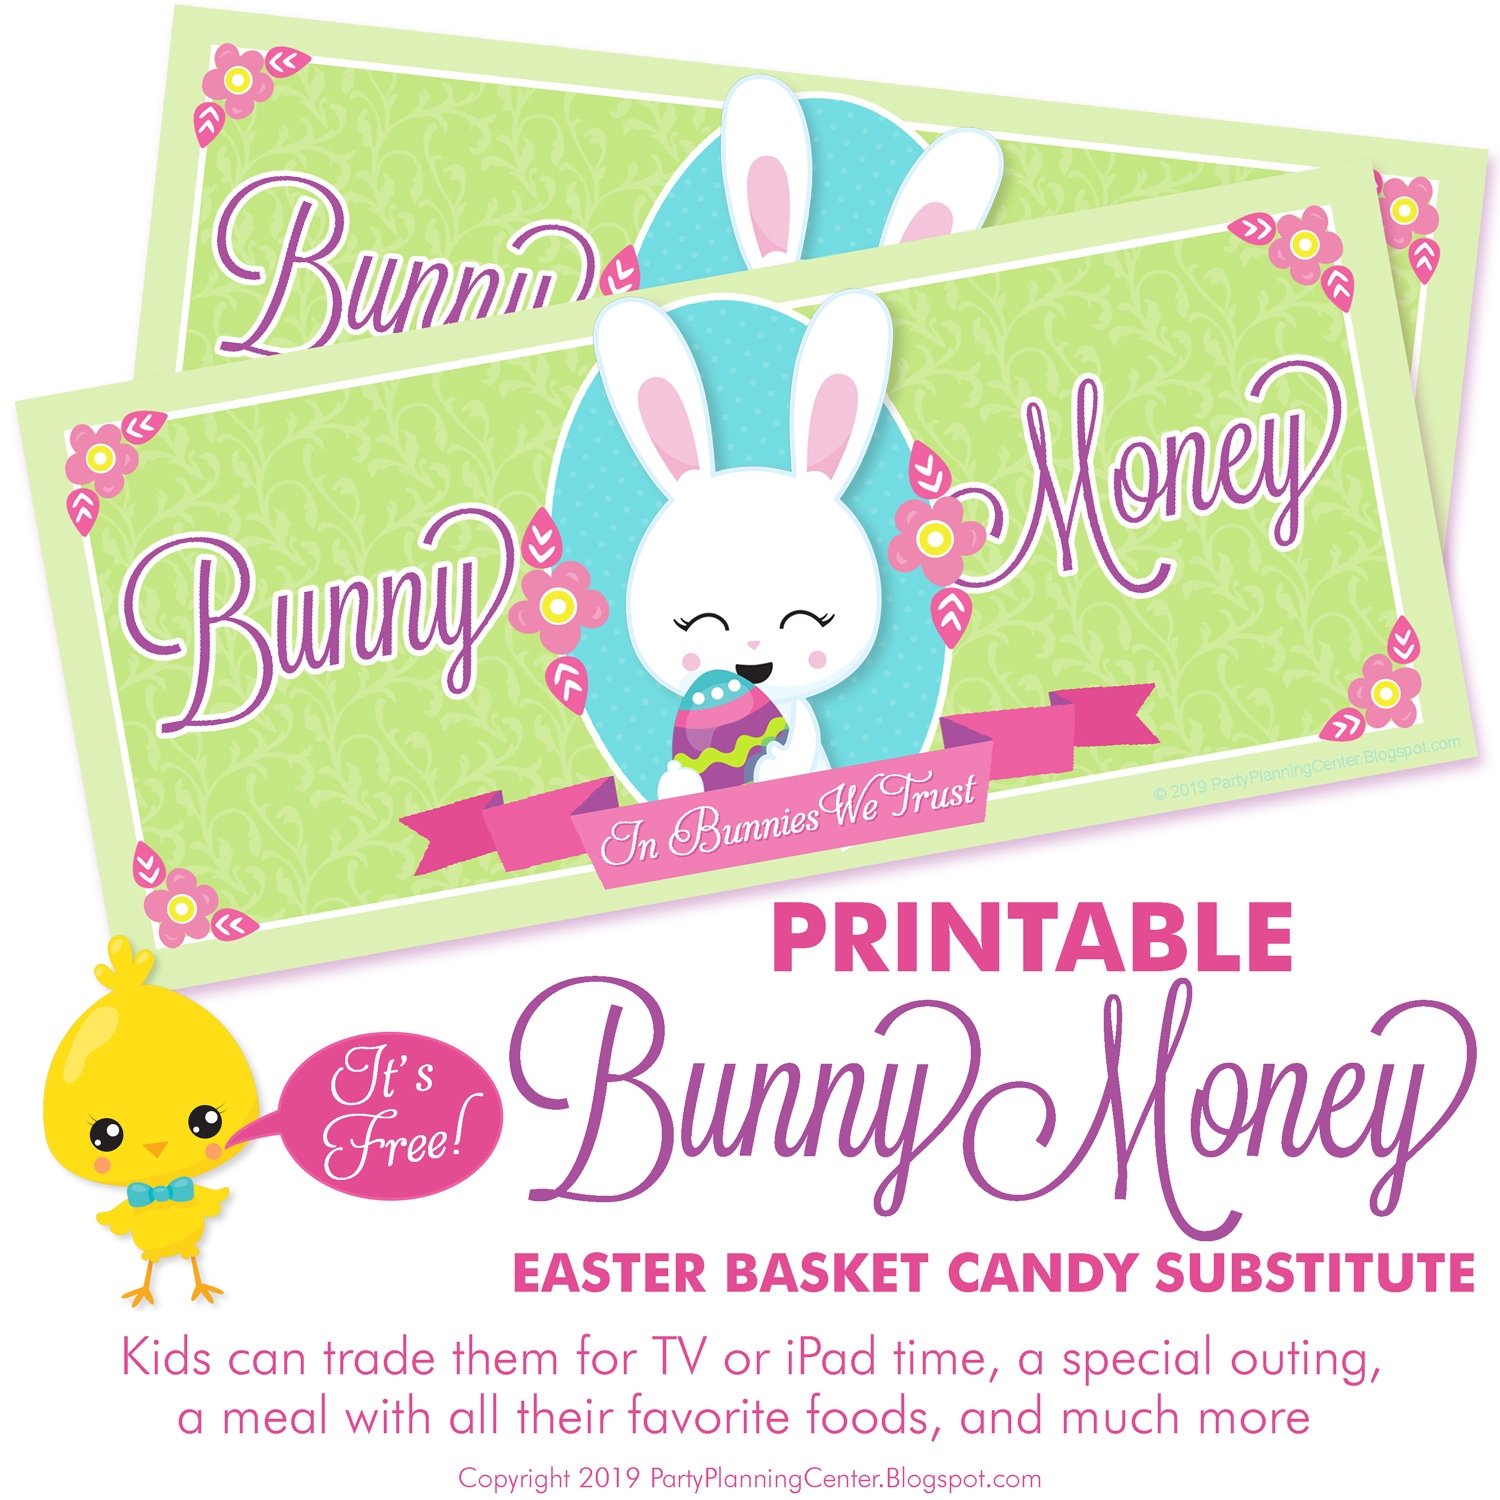 Party Planning Creative Easter Basket Ideas FREE Bunny Money